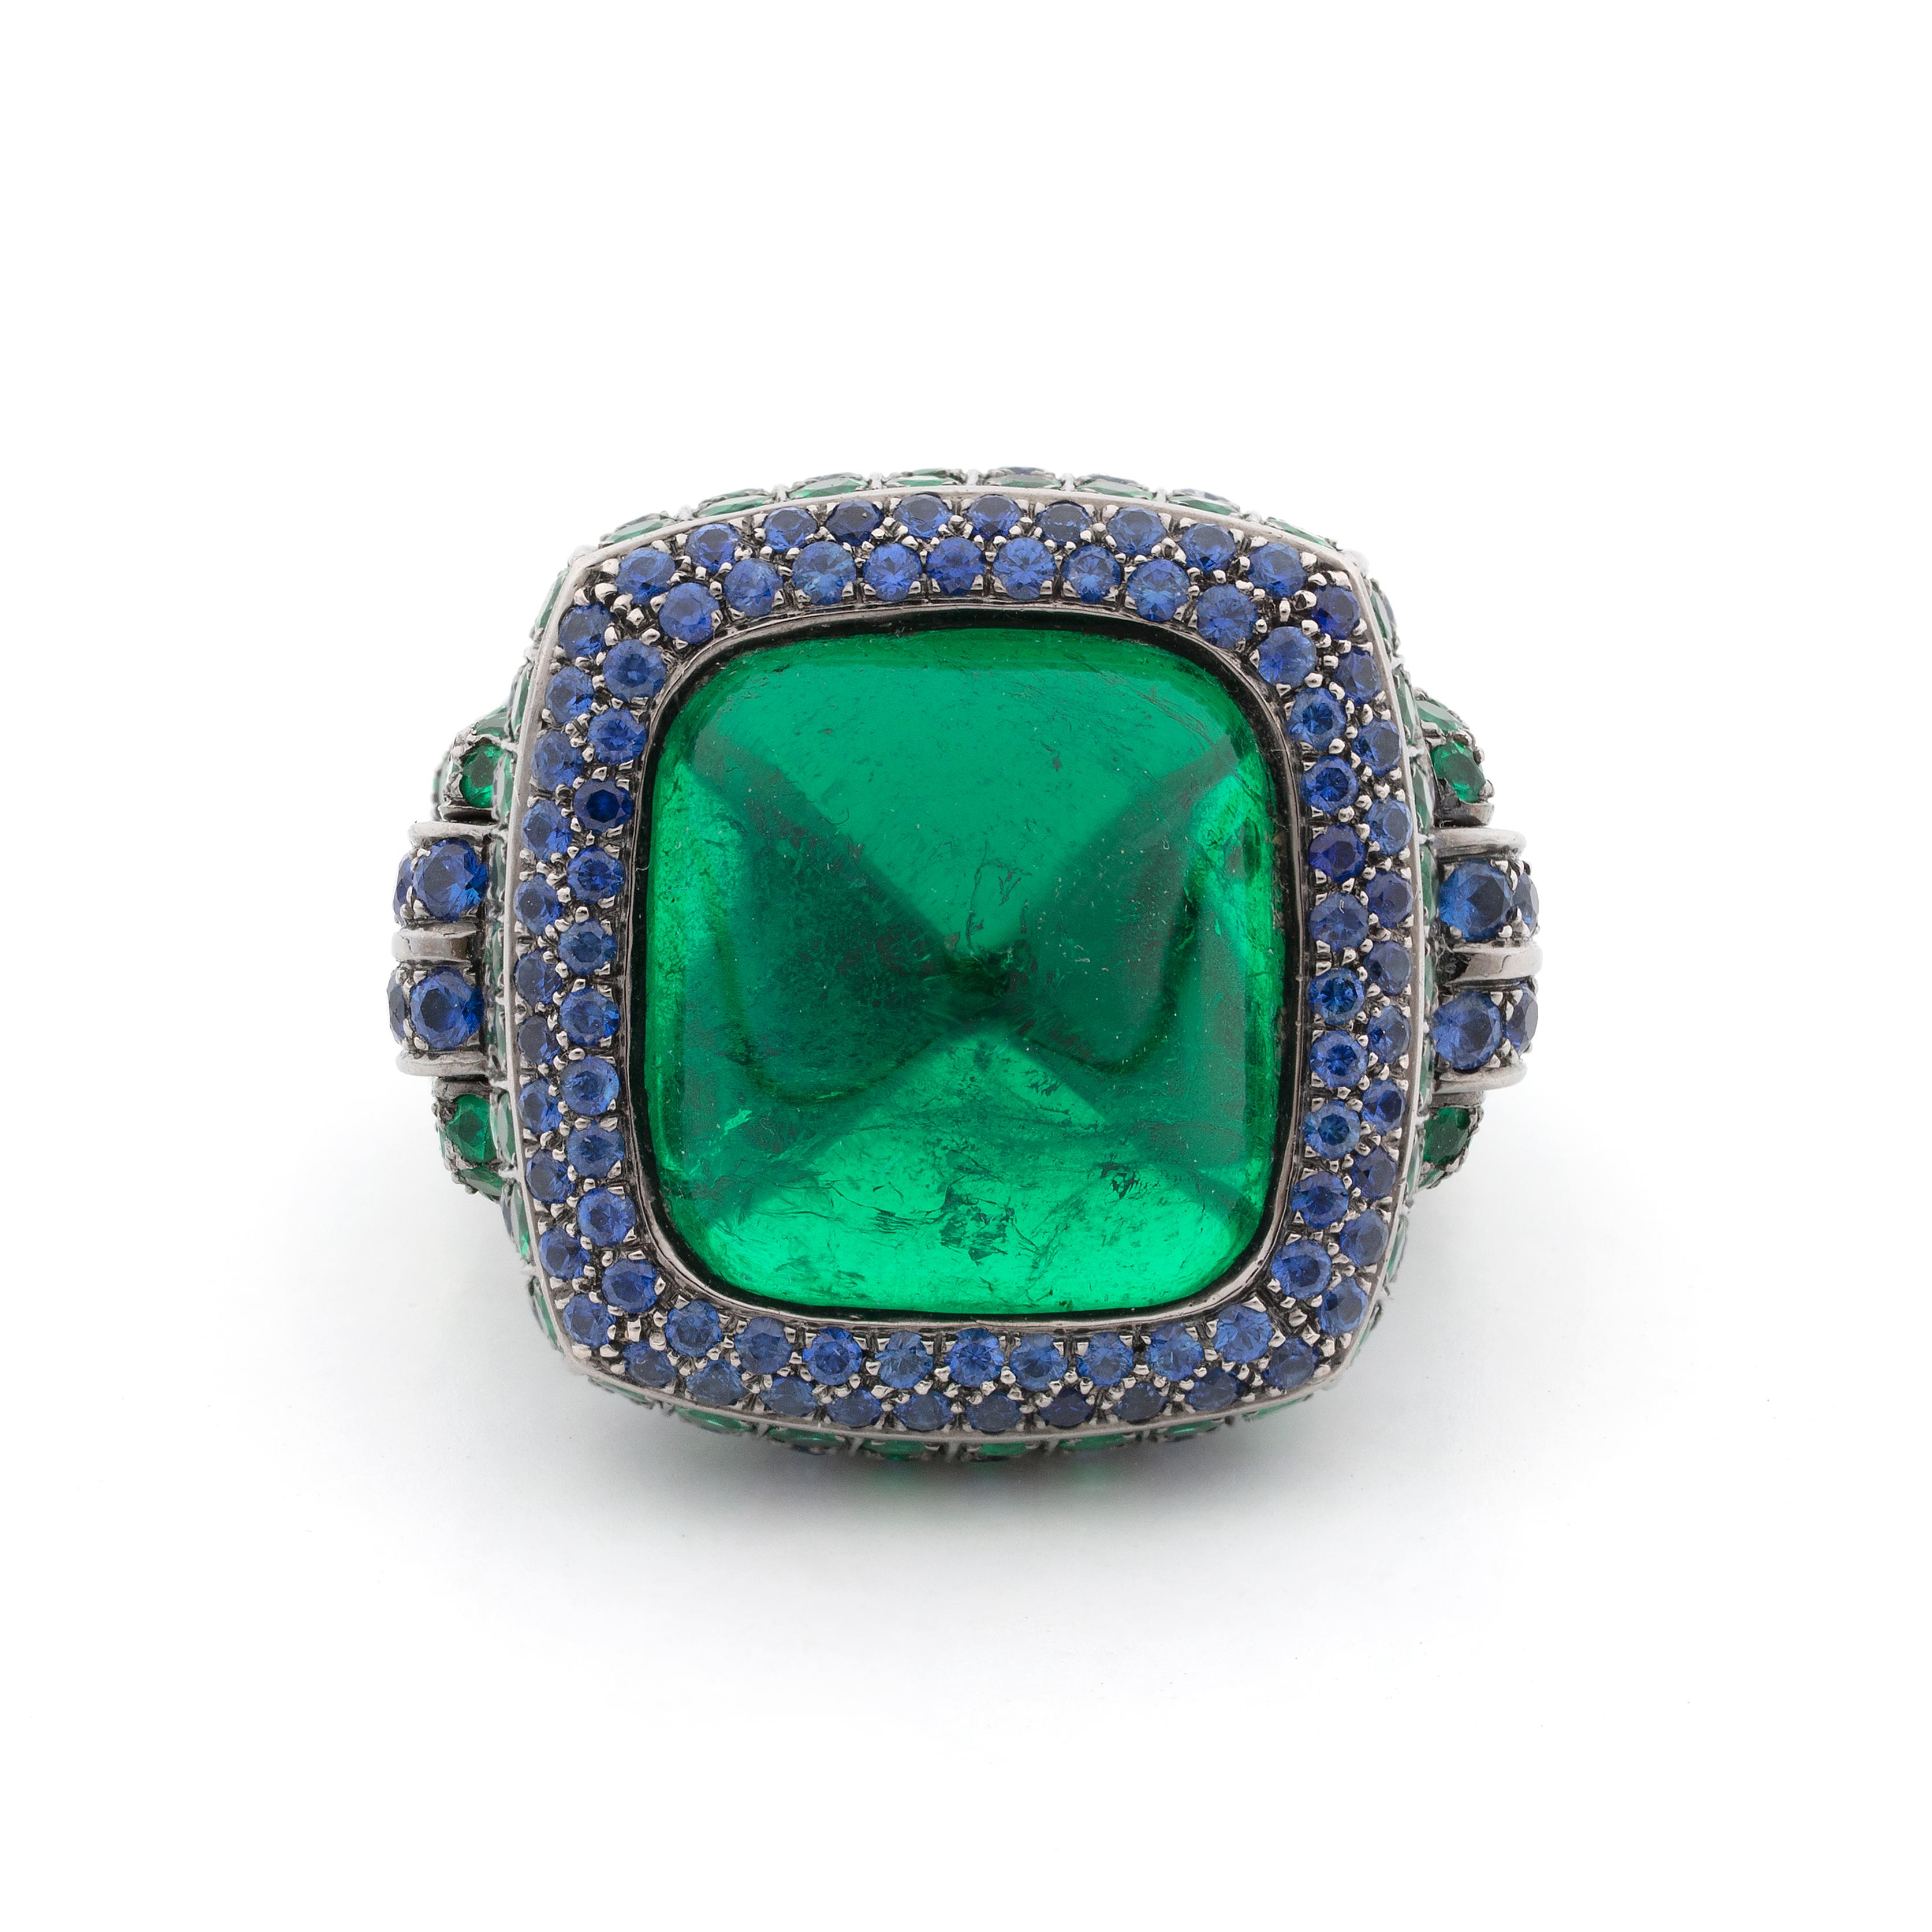 This is a spectacular Colombian emerald and blue sapphire ring from Boucheron. The centerpiece of this magical ring is the 15-carat sugarloaf Colombian emerald, which comes with a Gubelin certification. The stunningly clear emerald is surrounded by